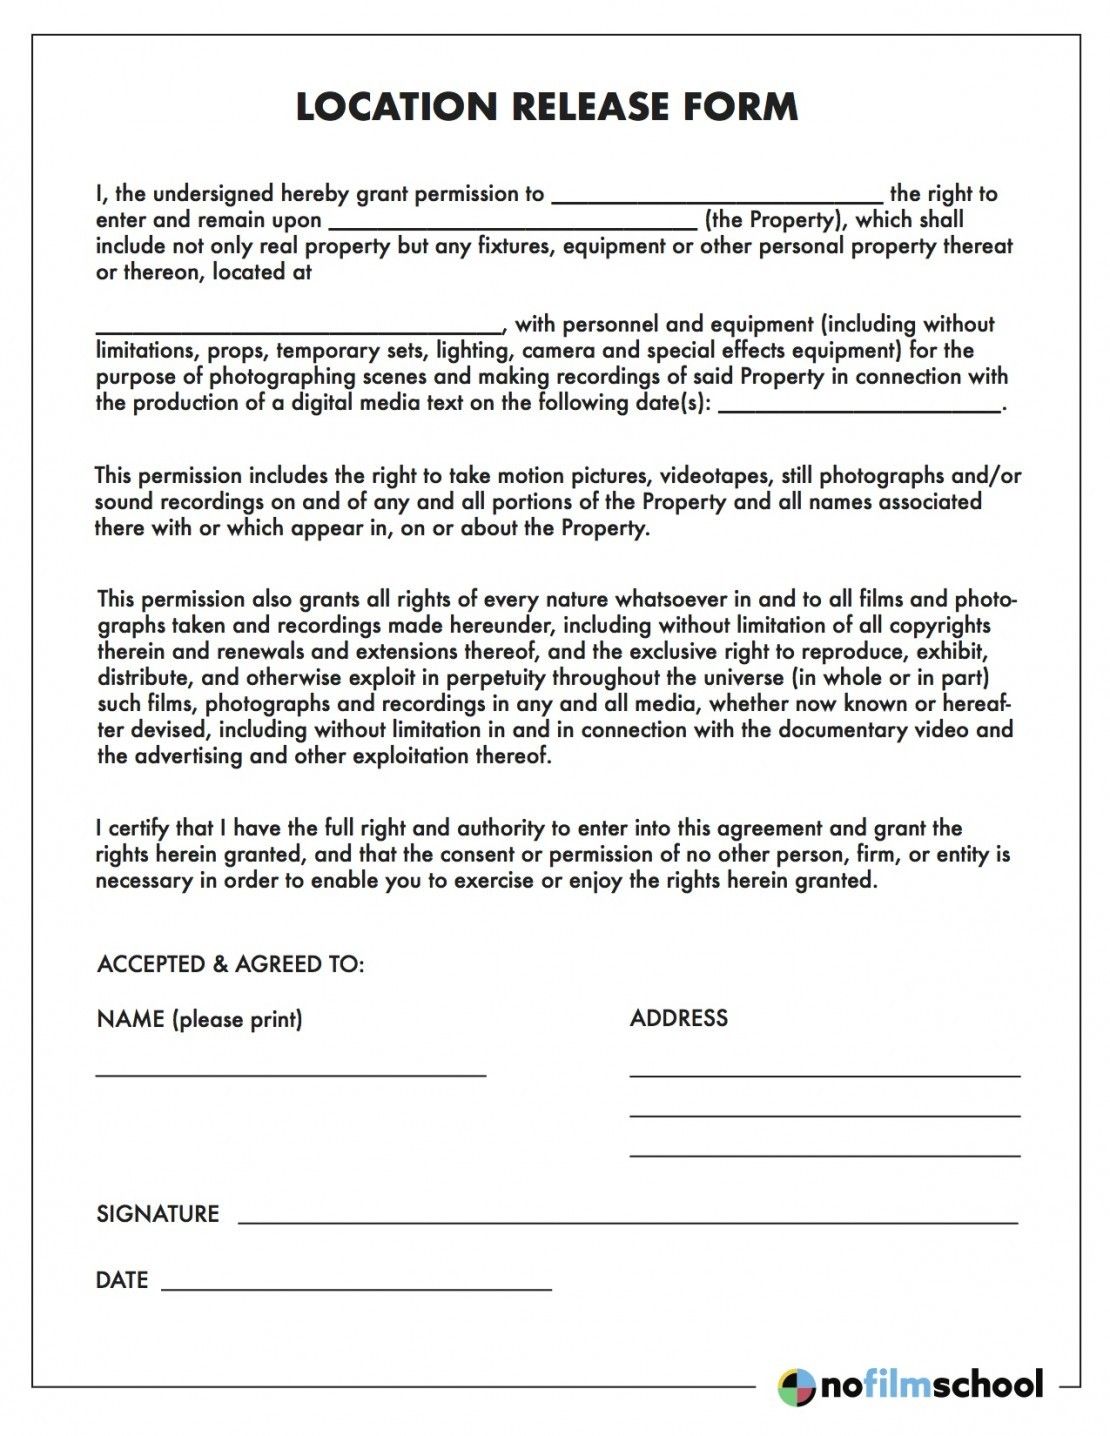 Location Release Form